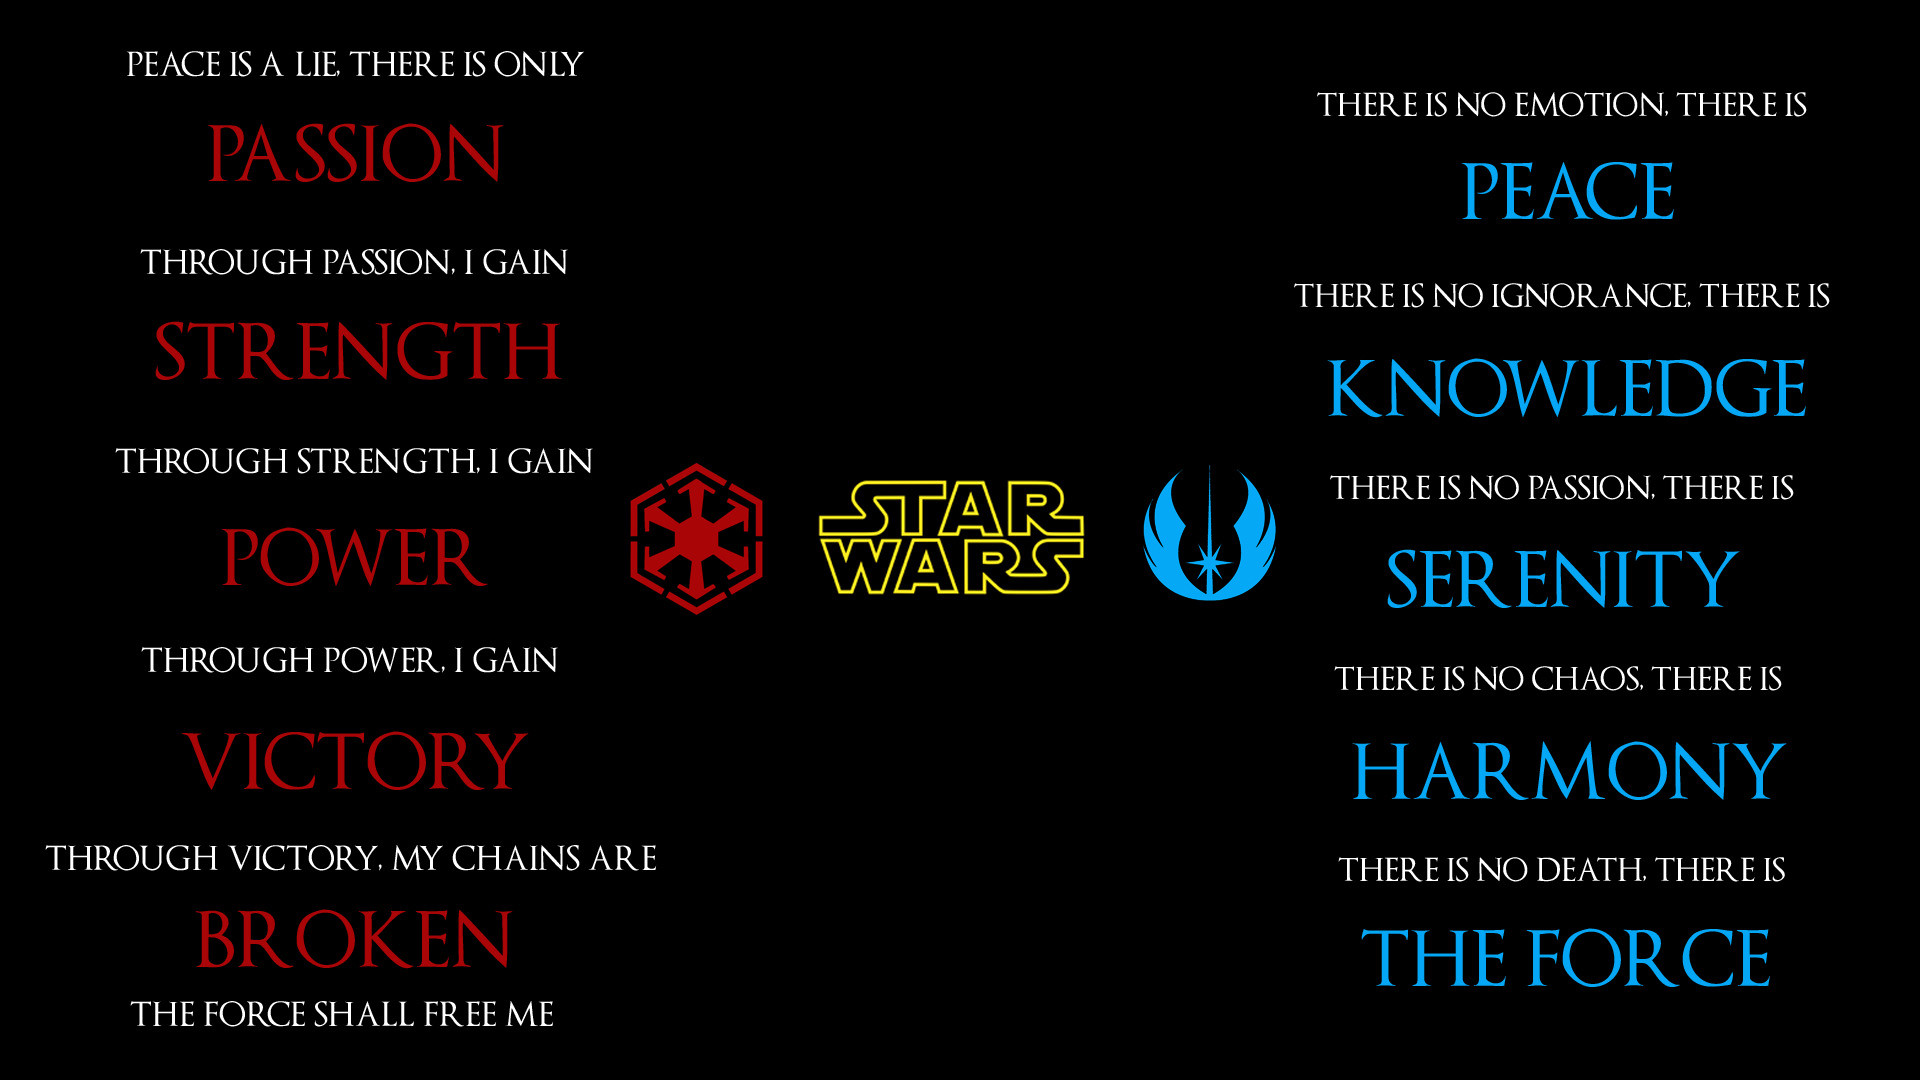 1920x1080 Variants for only Sith, or only Jedi: http://imgur.com/a/qBQGH Edited so  that "The Force" is highlighted in the Sith Code, Rather than "Broken" ...